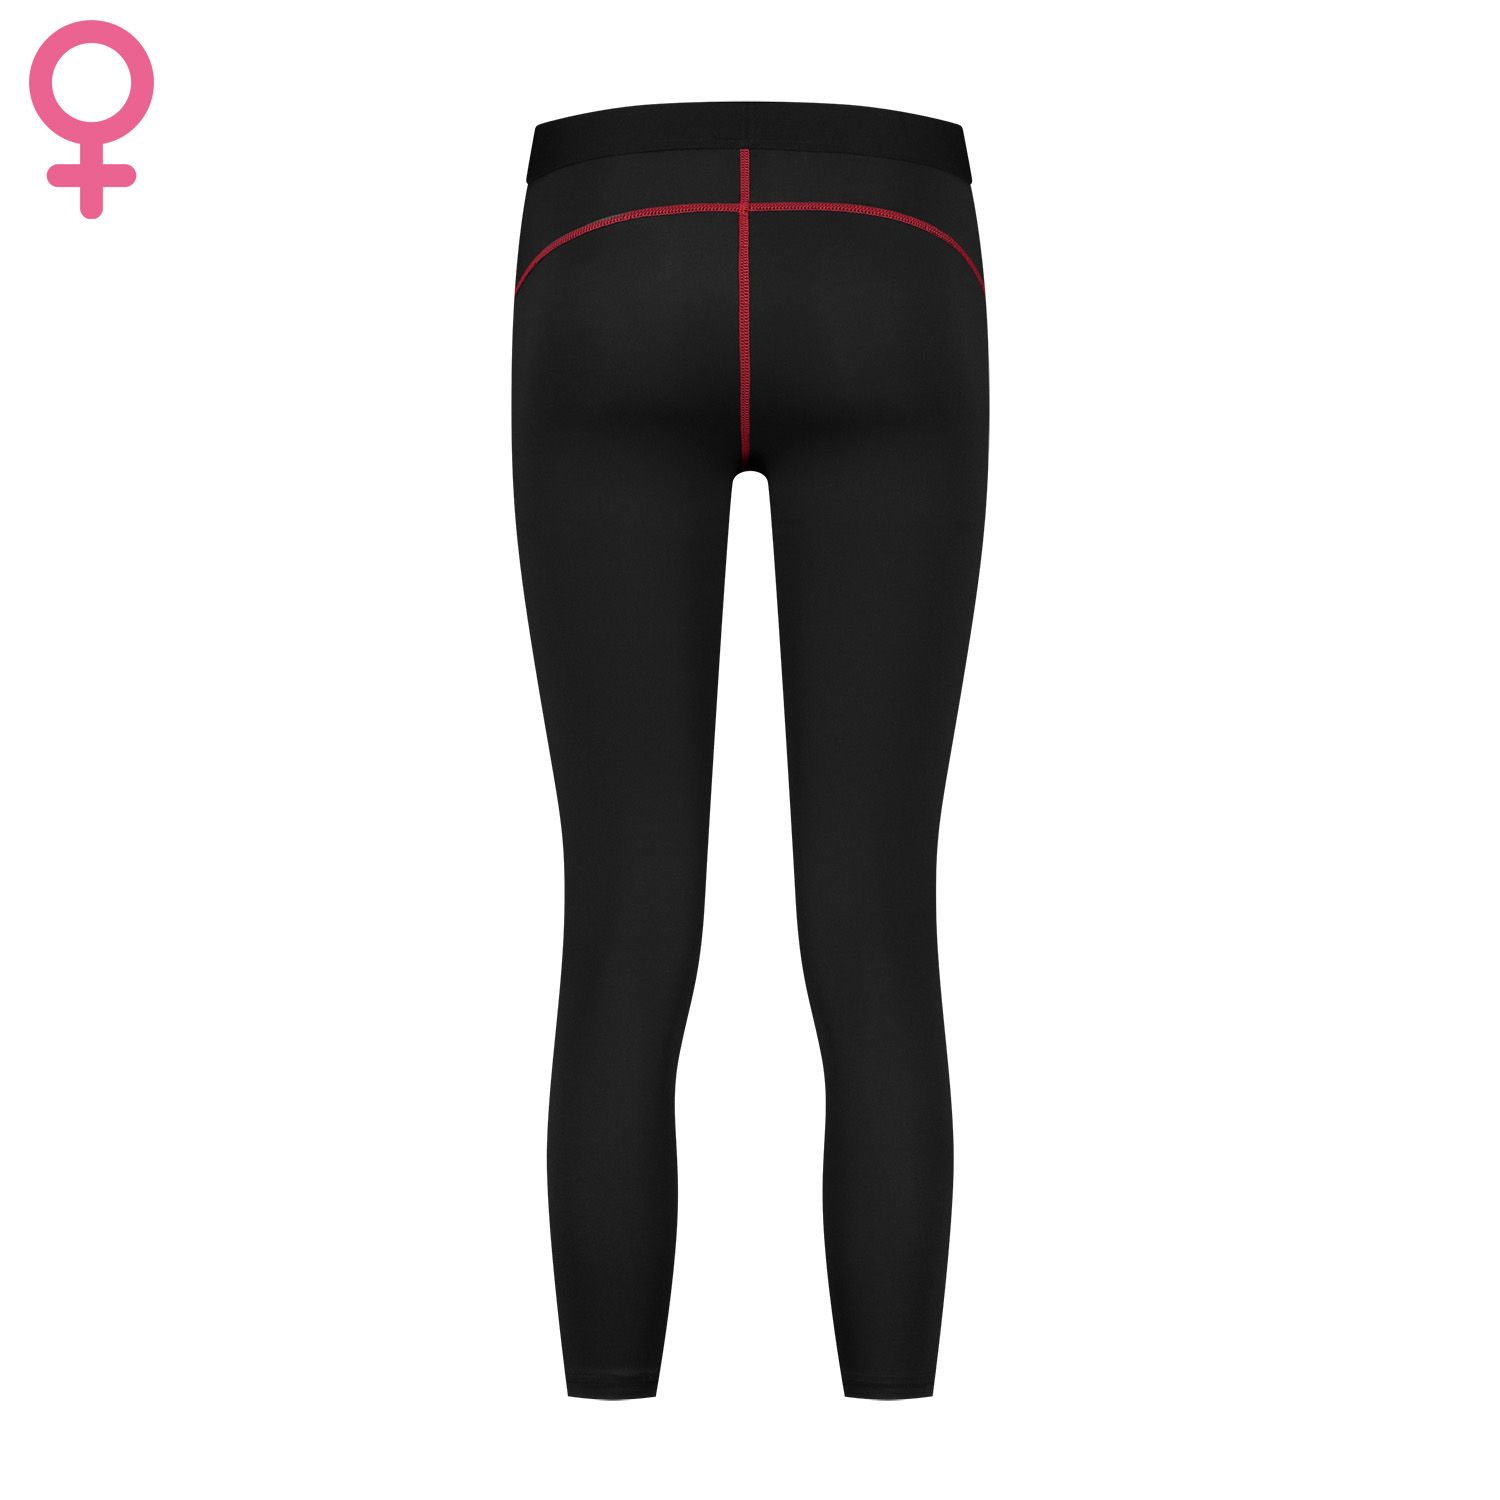 gladiator sports thermal tights long women back